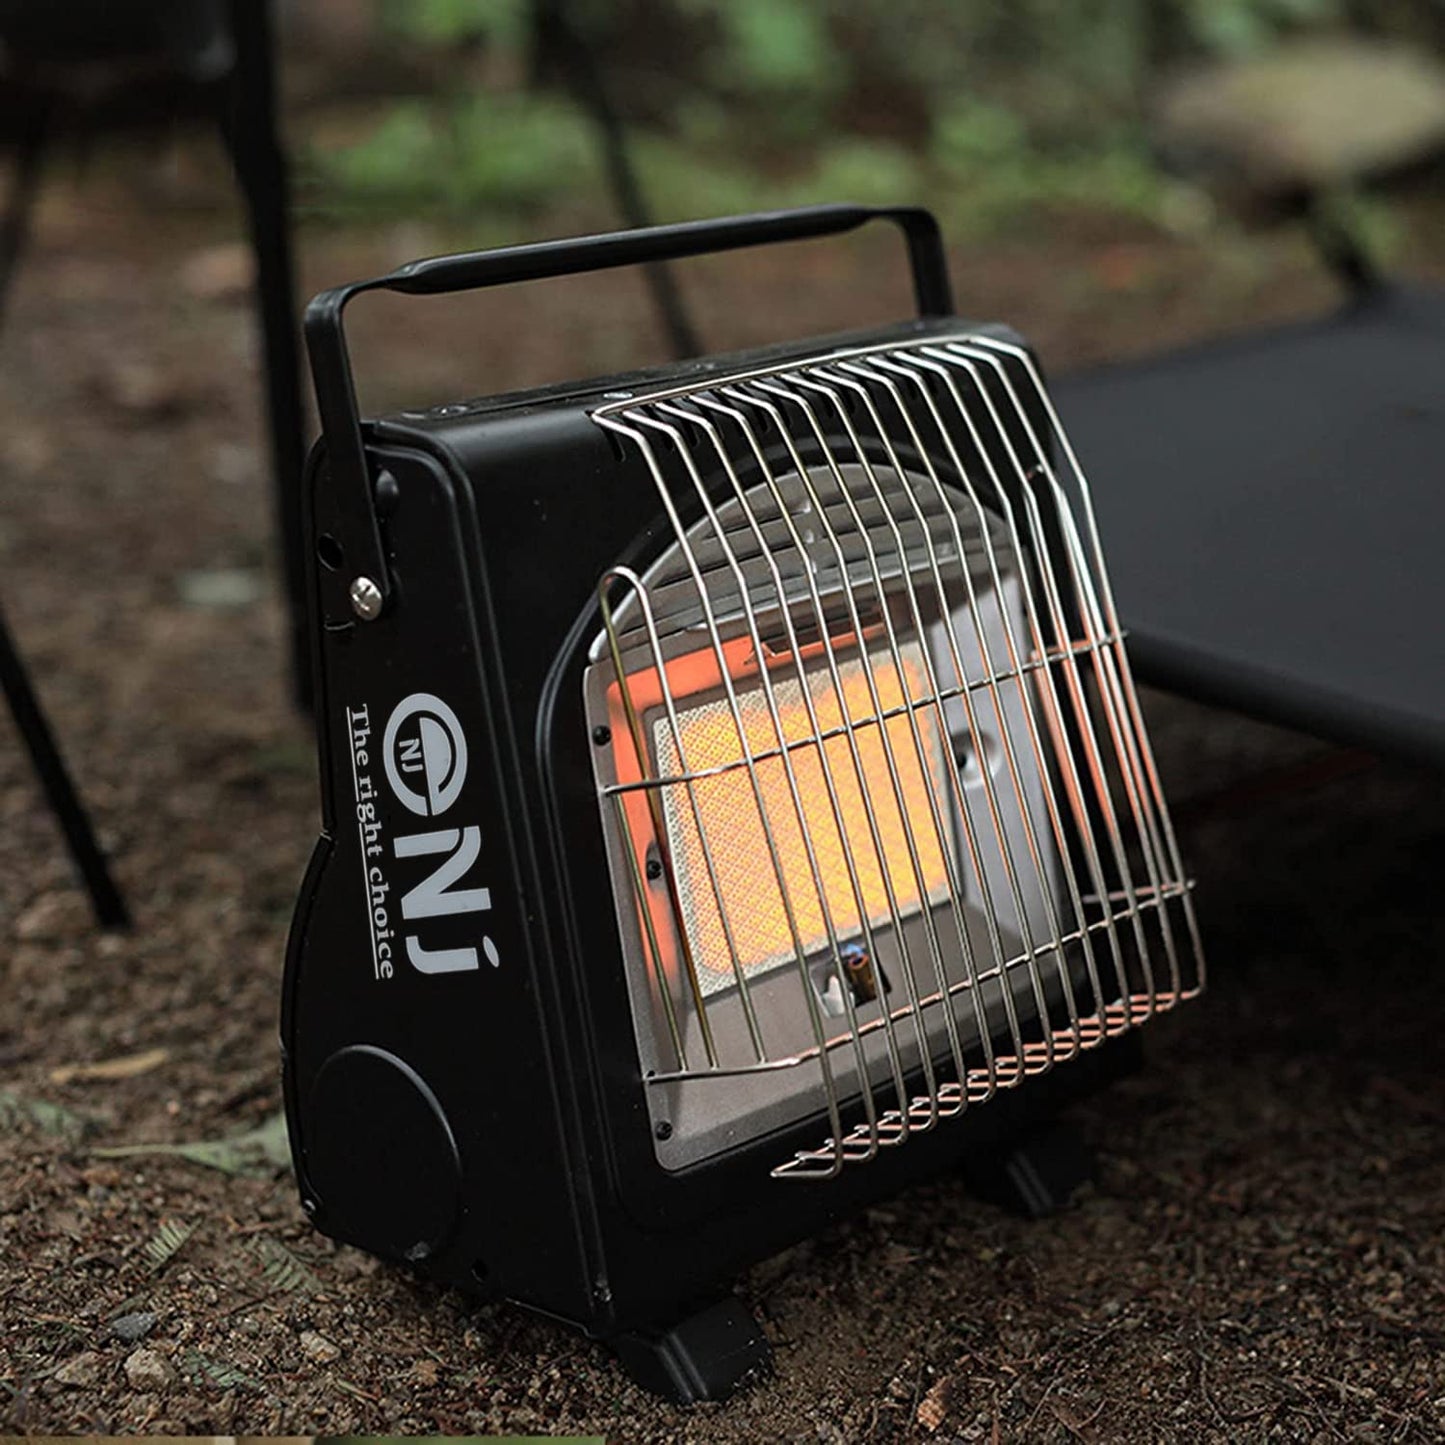 NJ-H1 Camping Gas Heater Portable Stove